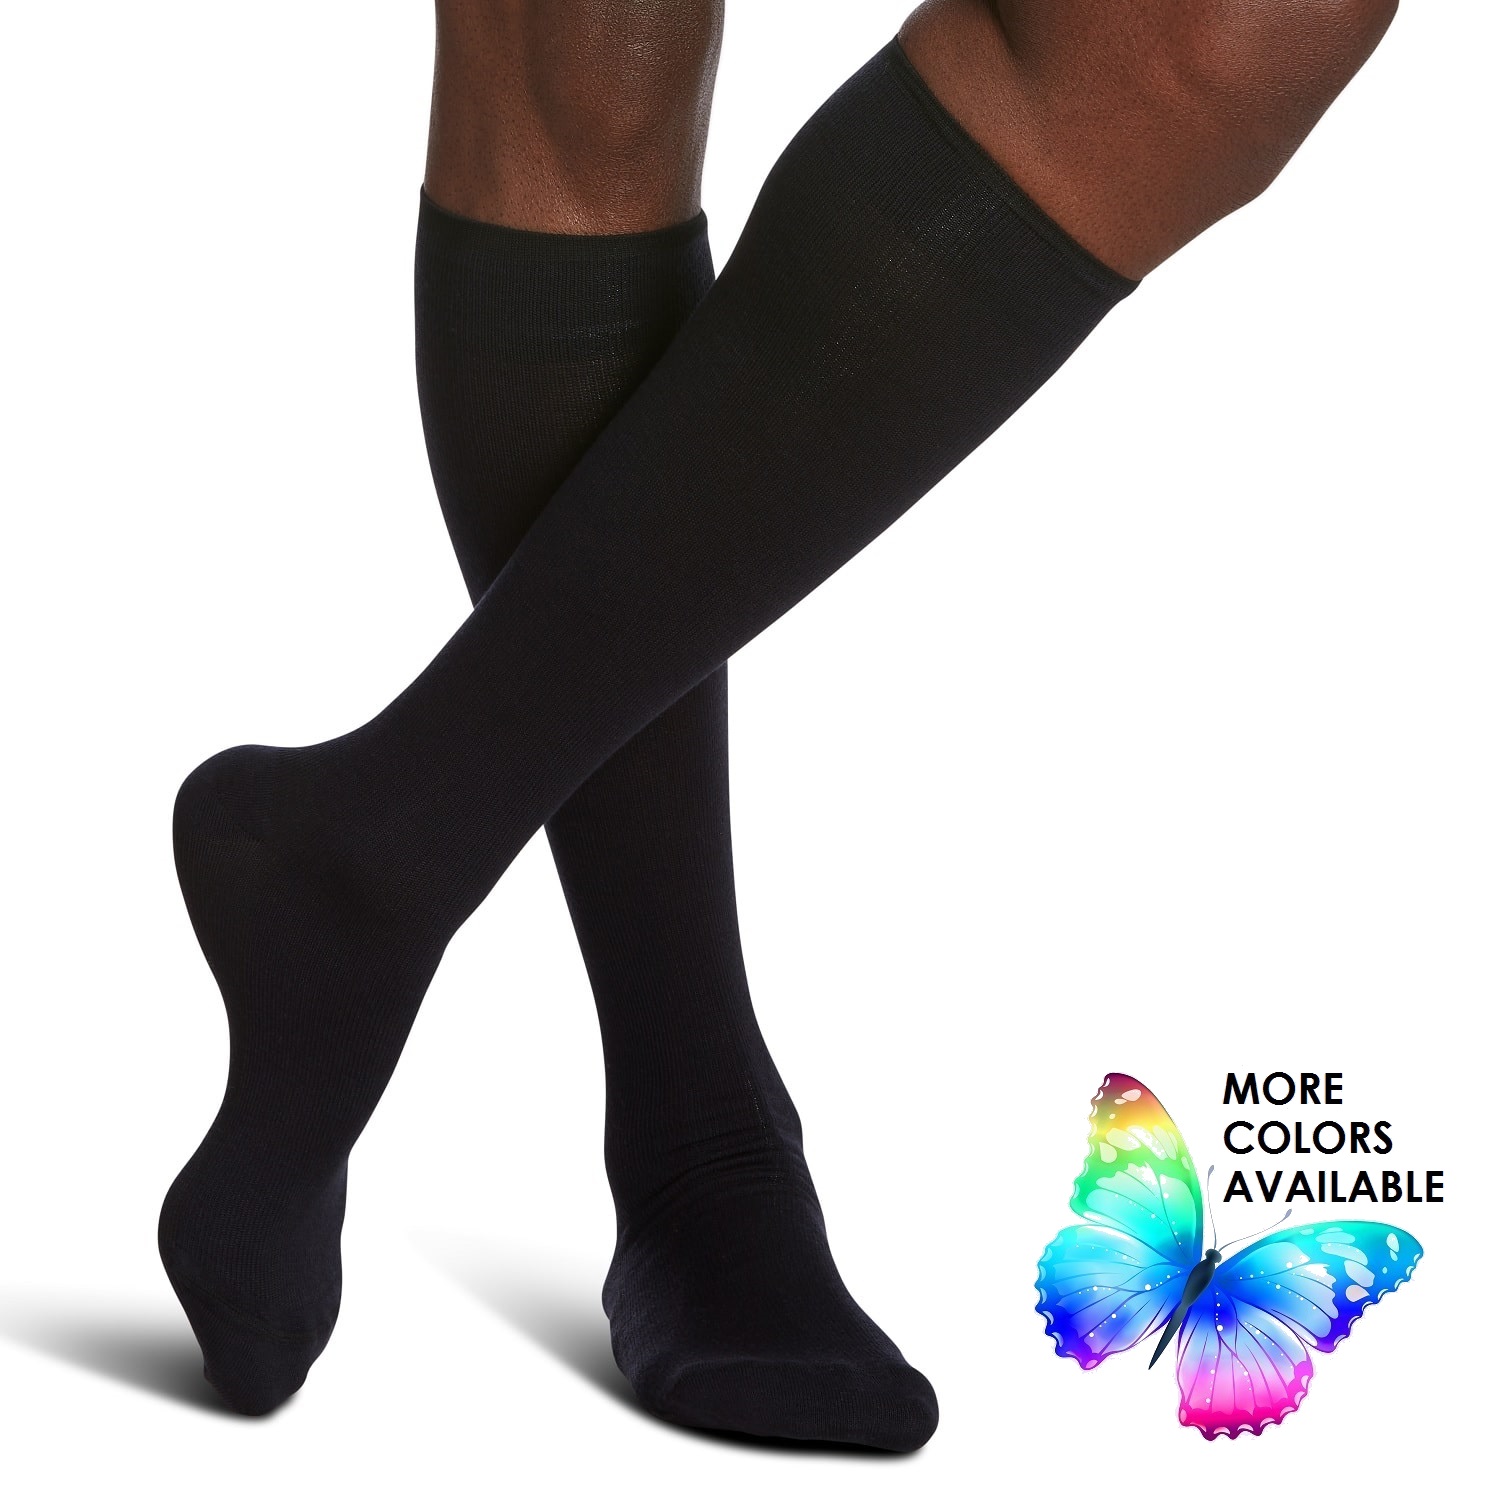 Can compression socks be stylish? Lymphedema Life and Style